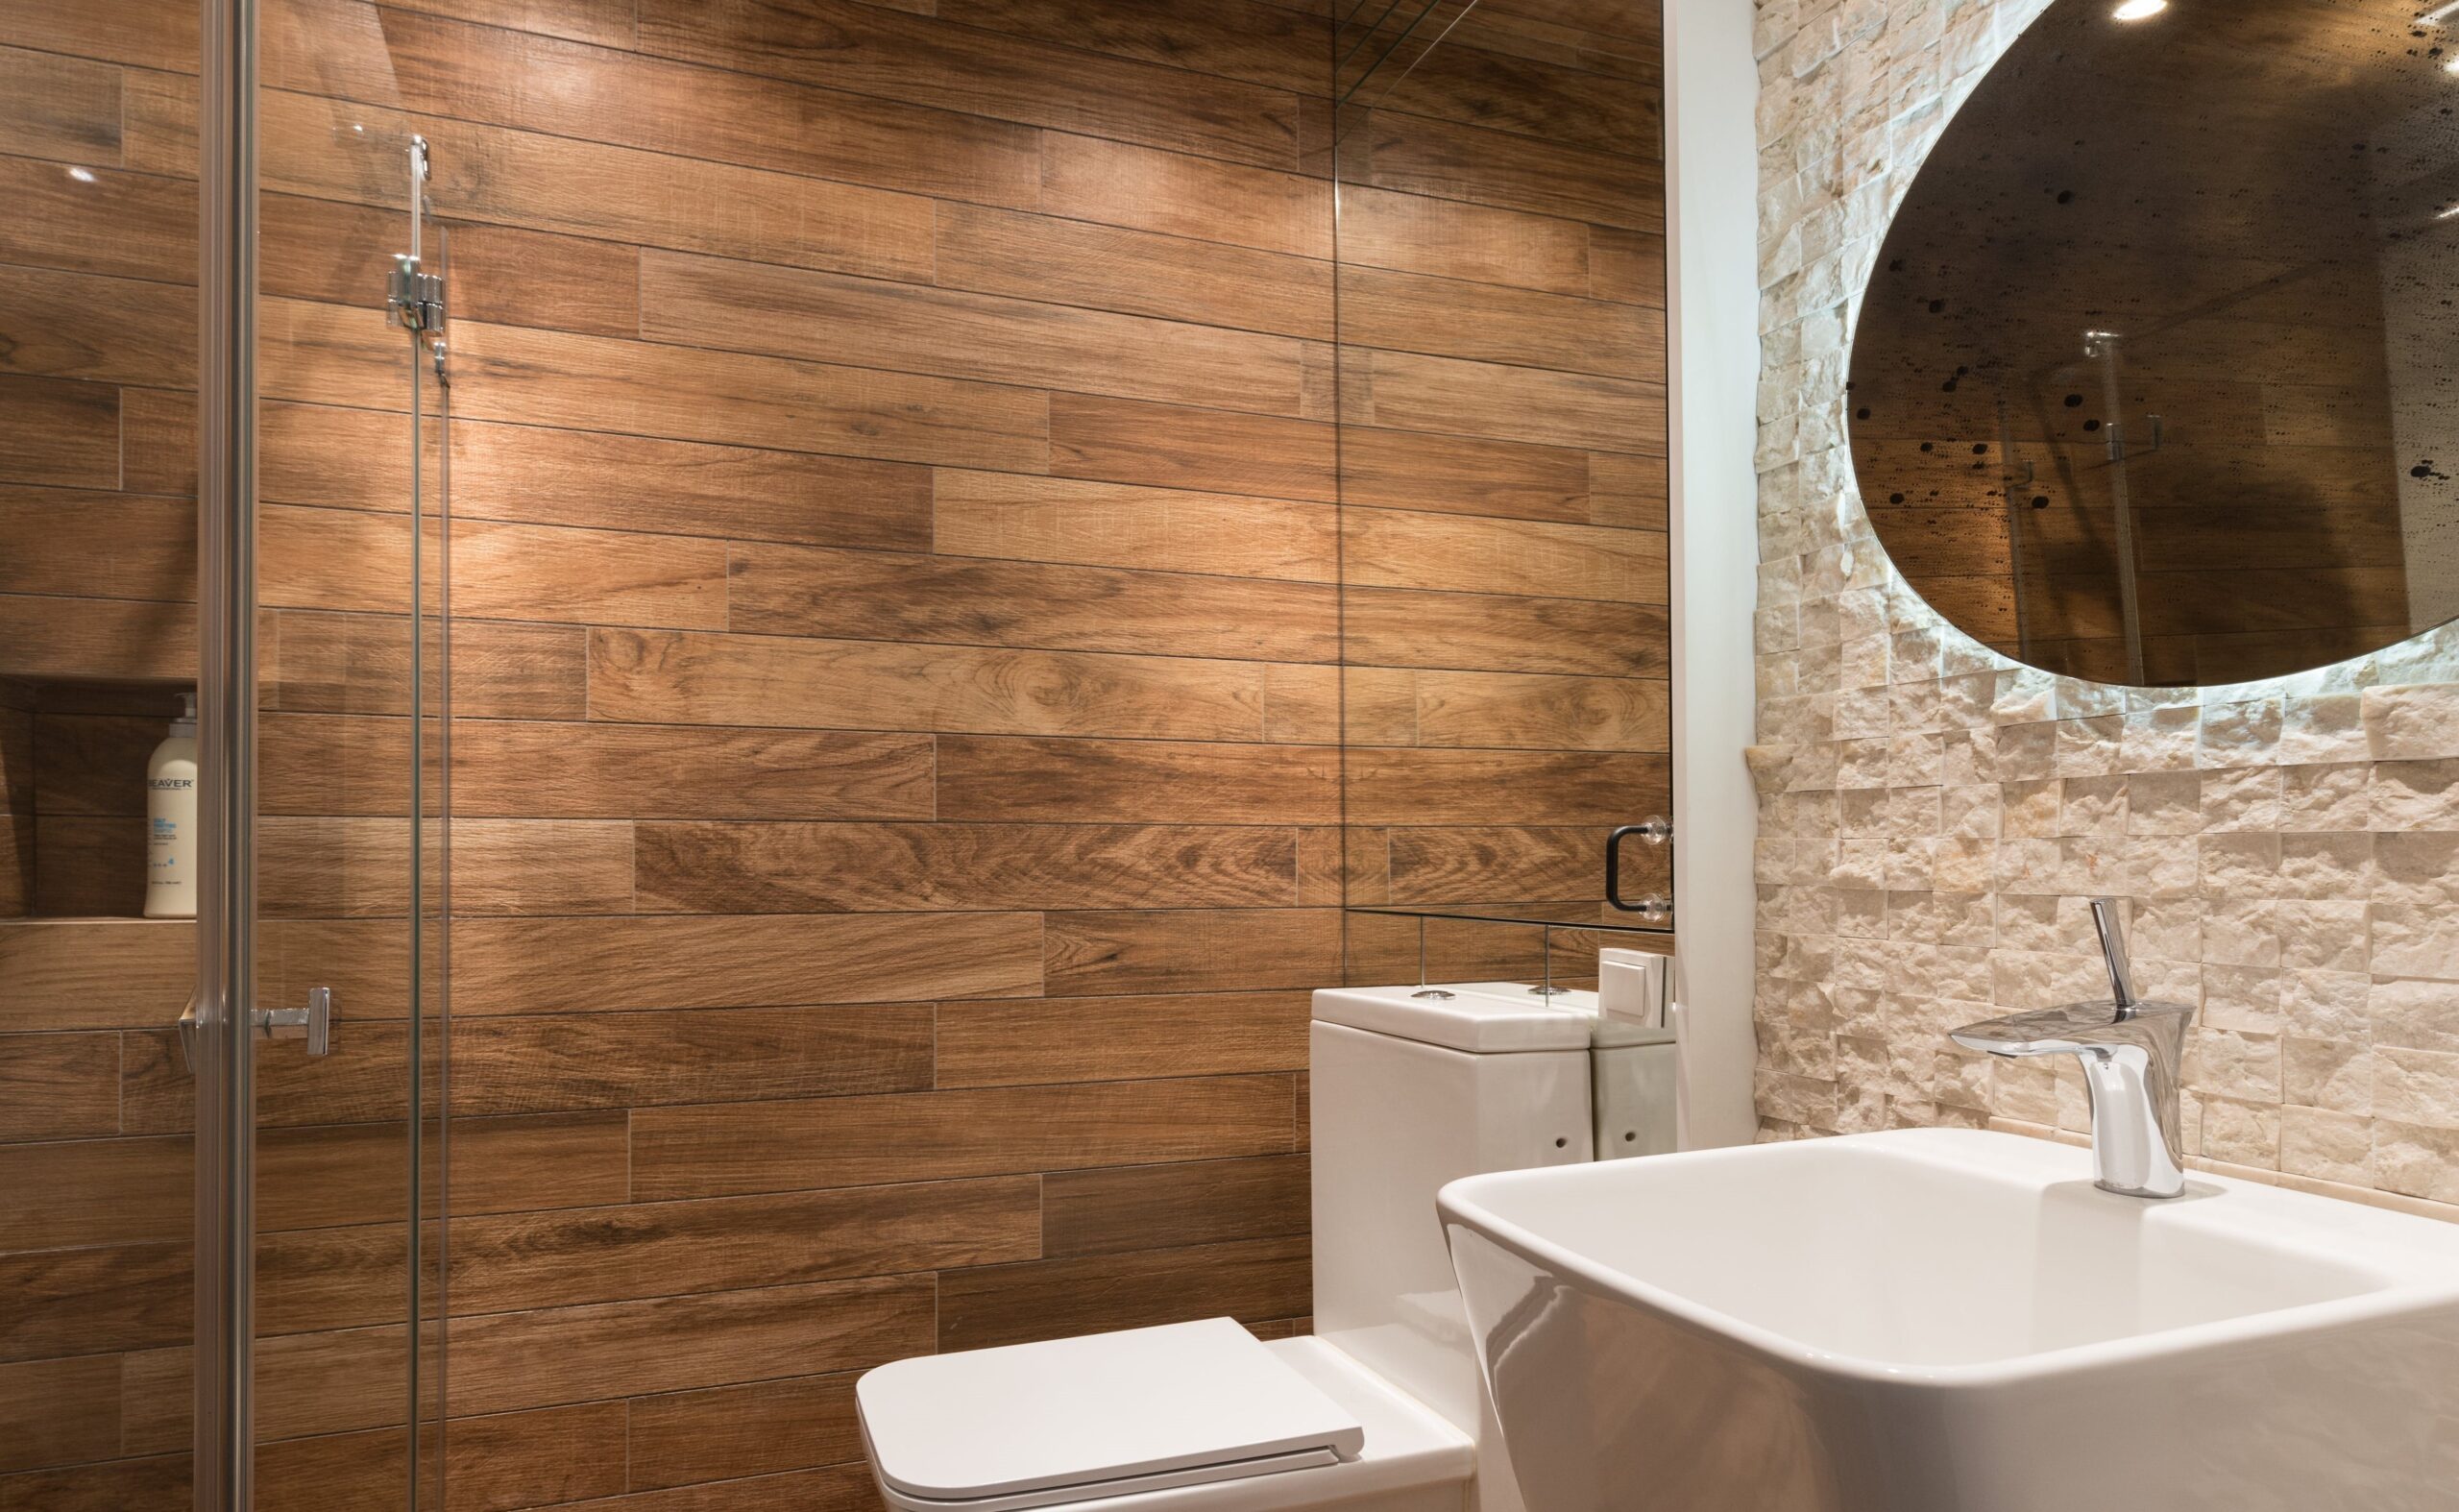 Natural tile motifs, like this wood pattern, warm up a white bathroom.